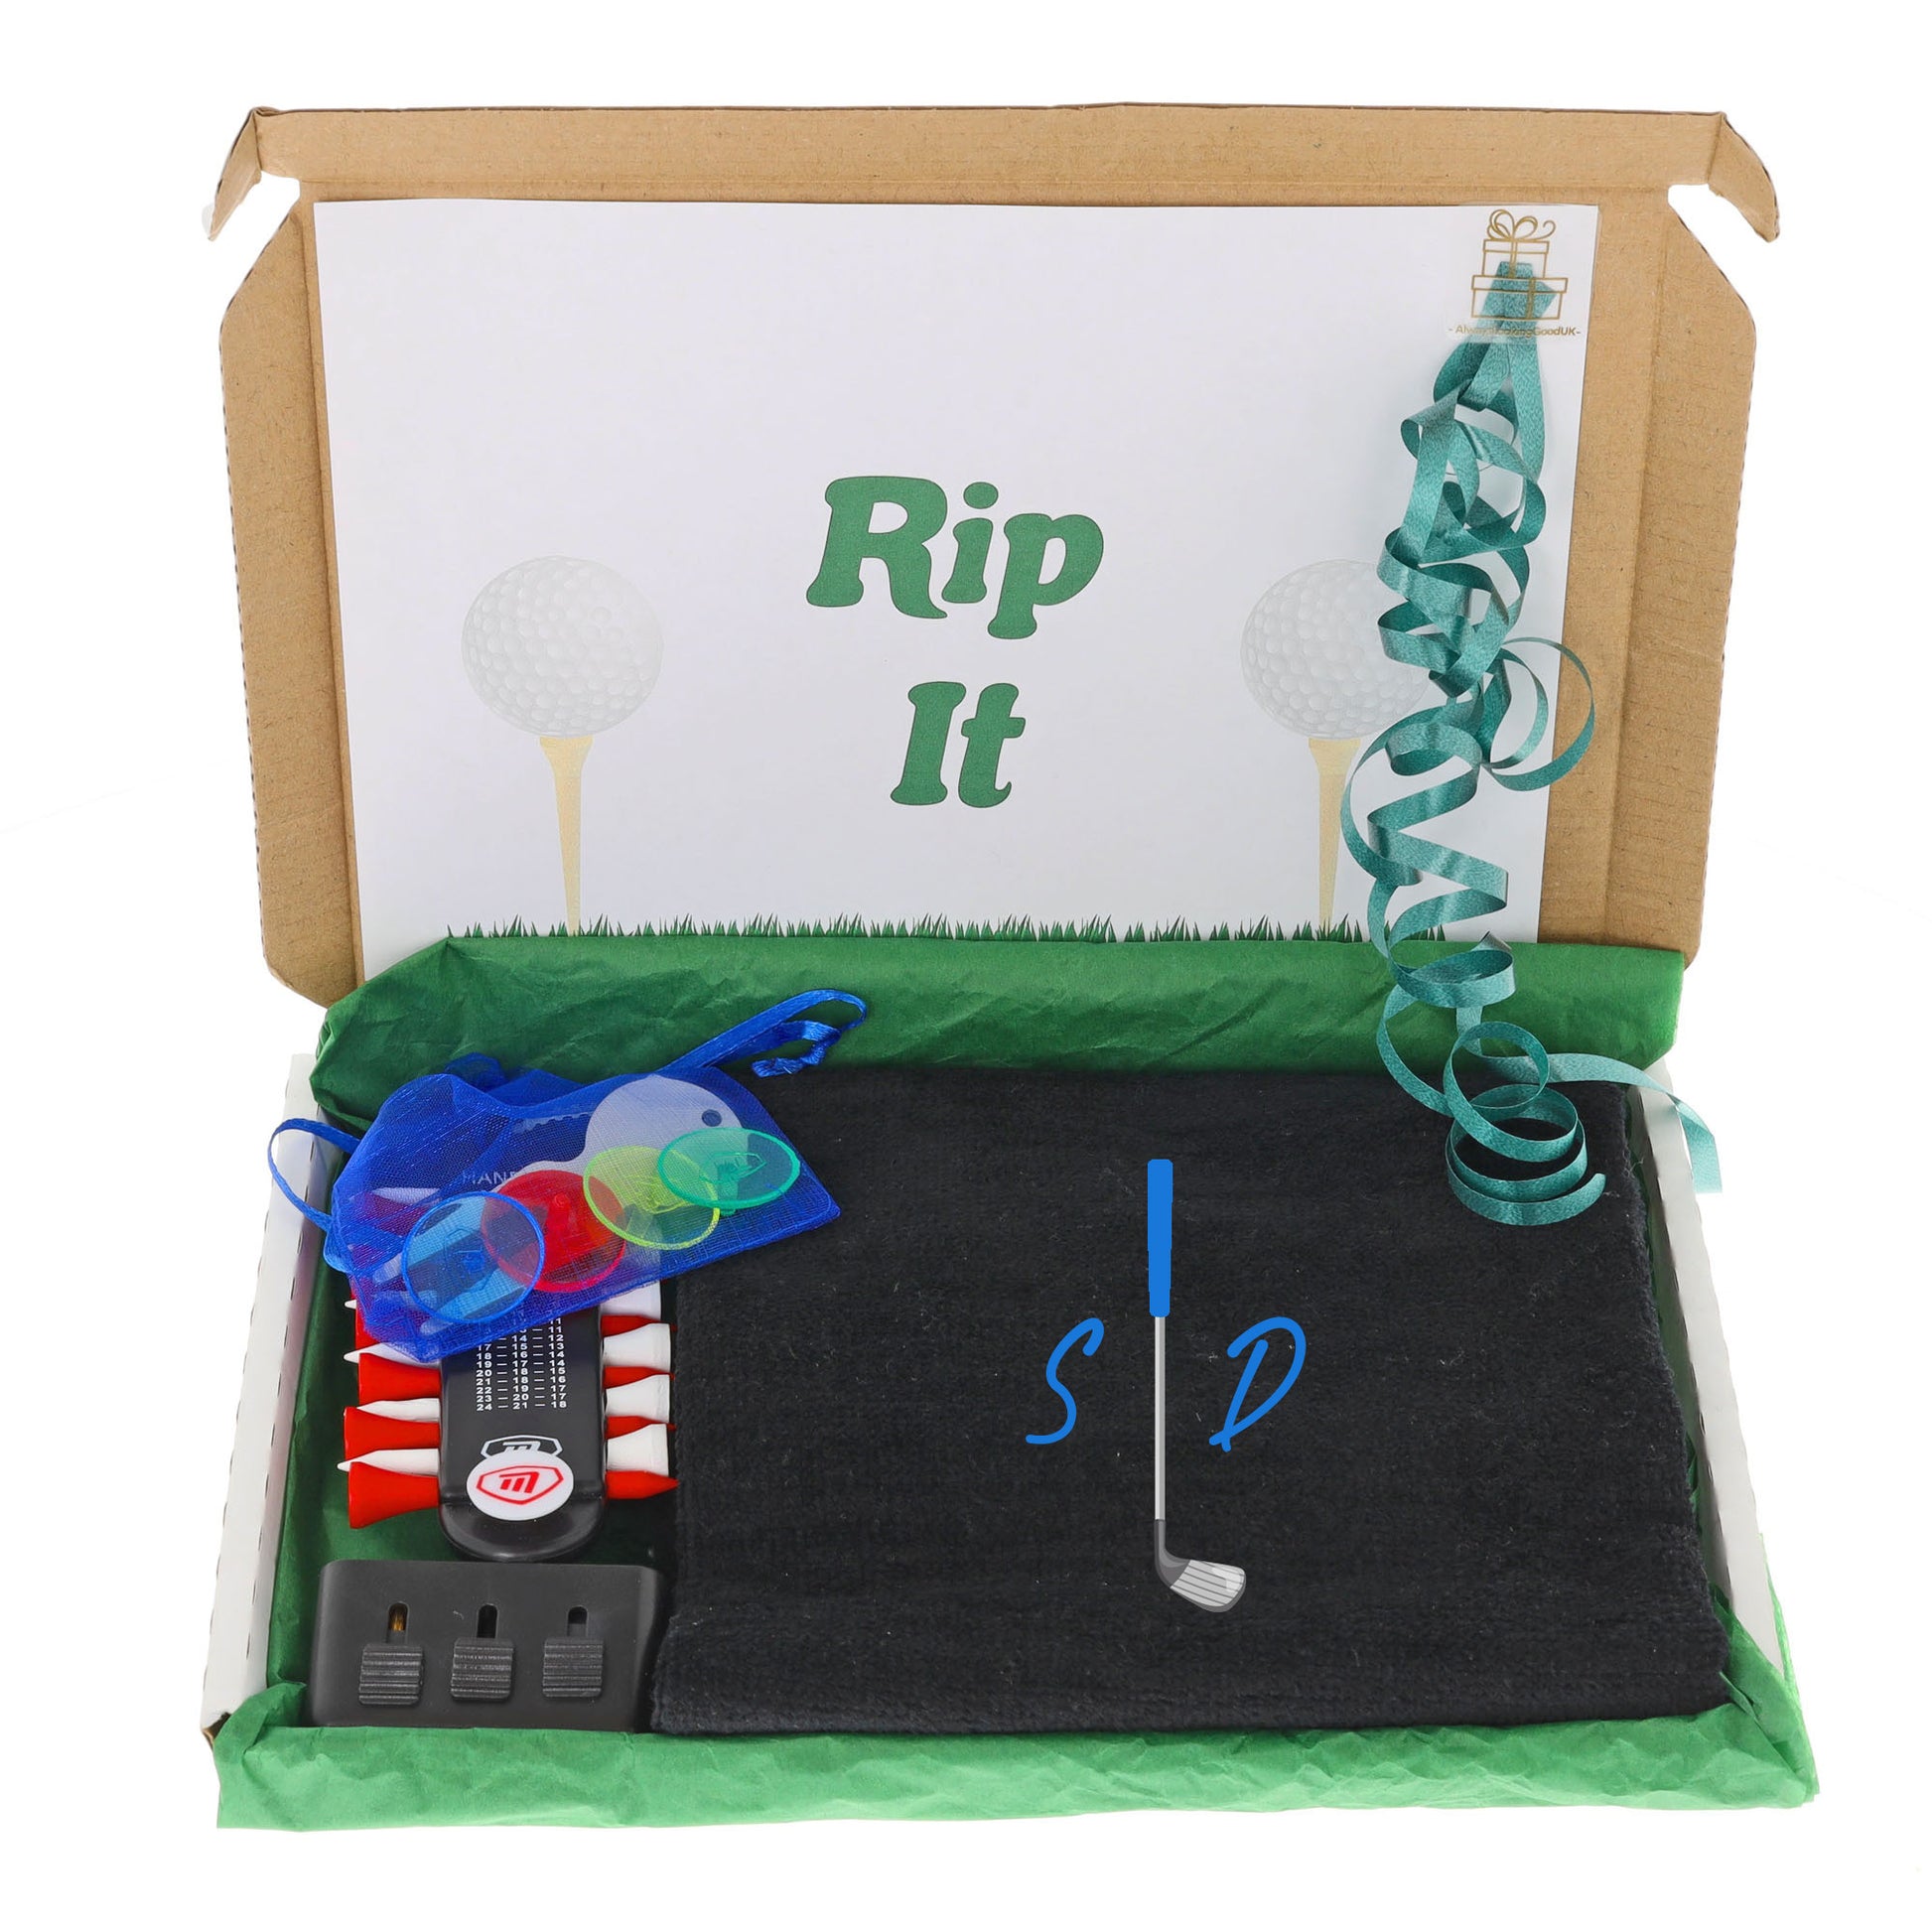 Personalised Embroidered Golf Club Design Towel & Accessories Letterbox Gift  - Always Looking Good -   